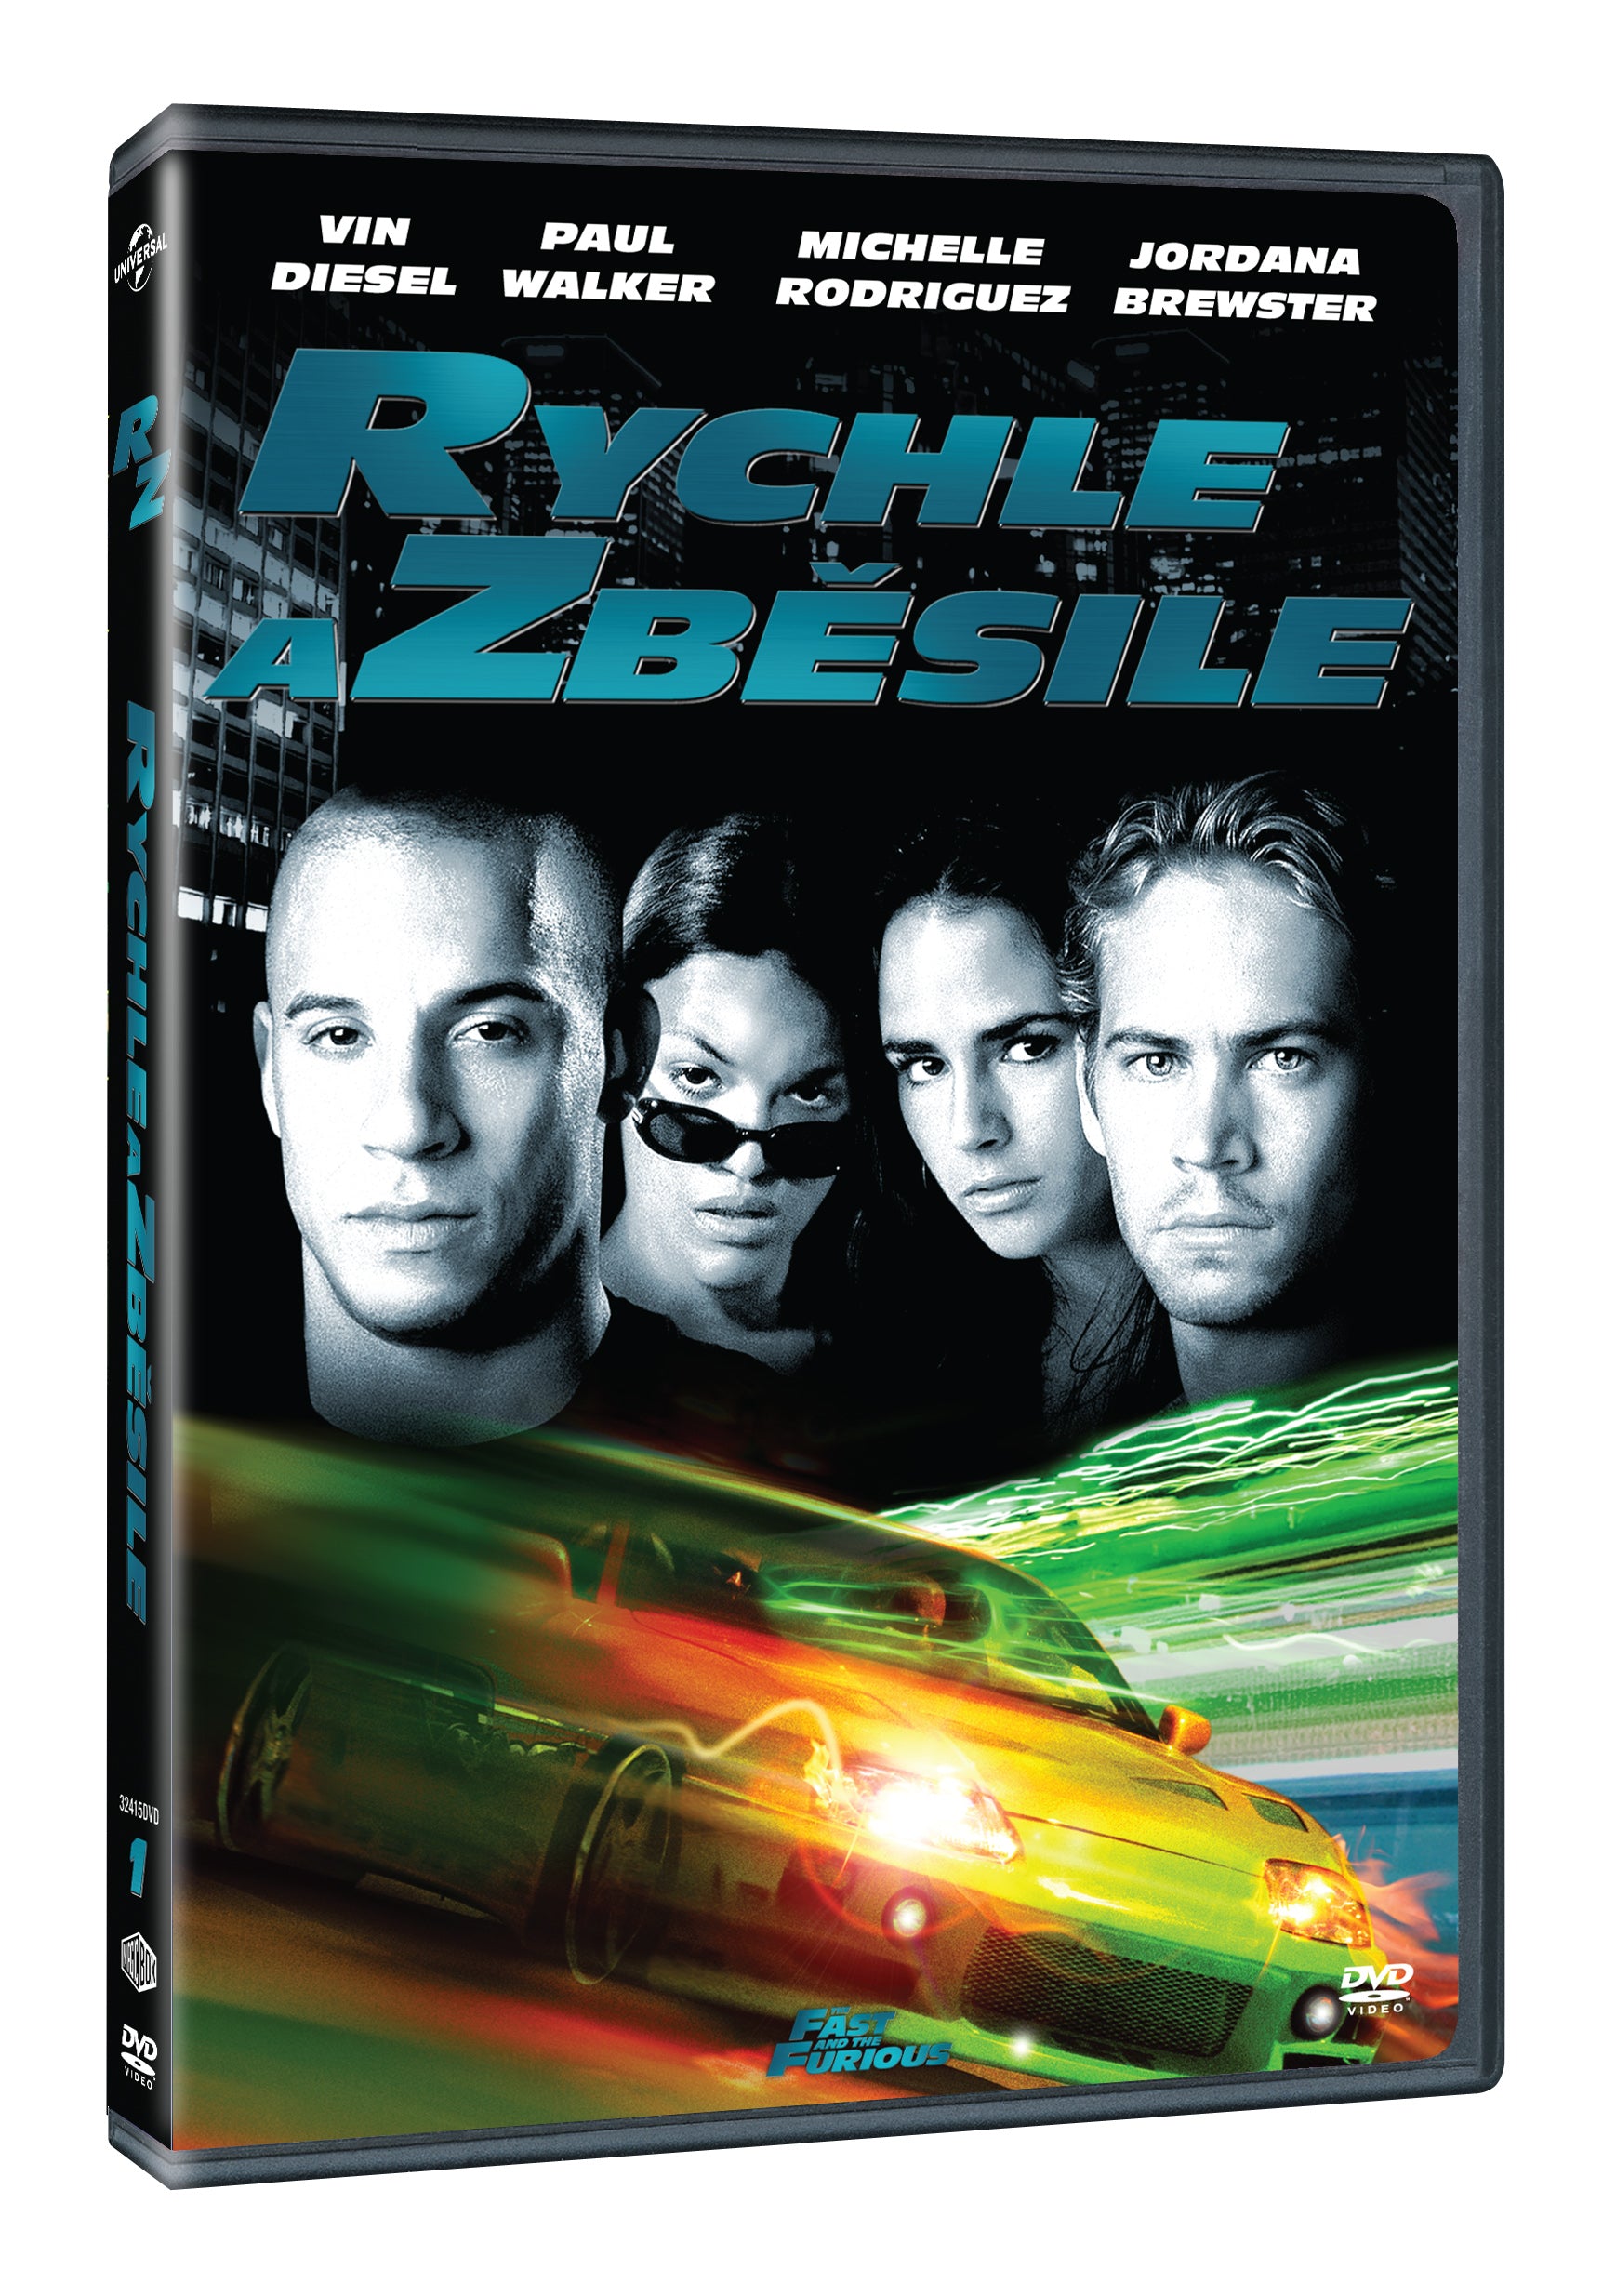 Rychle eine zbesile DVD / The Fast and the Furious